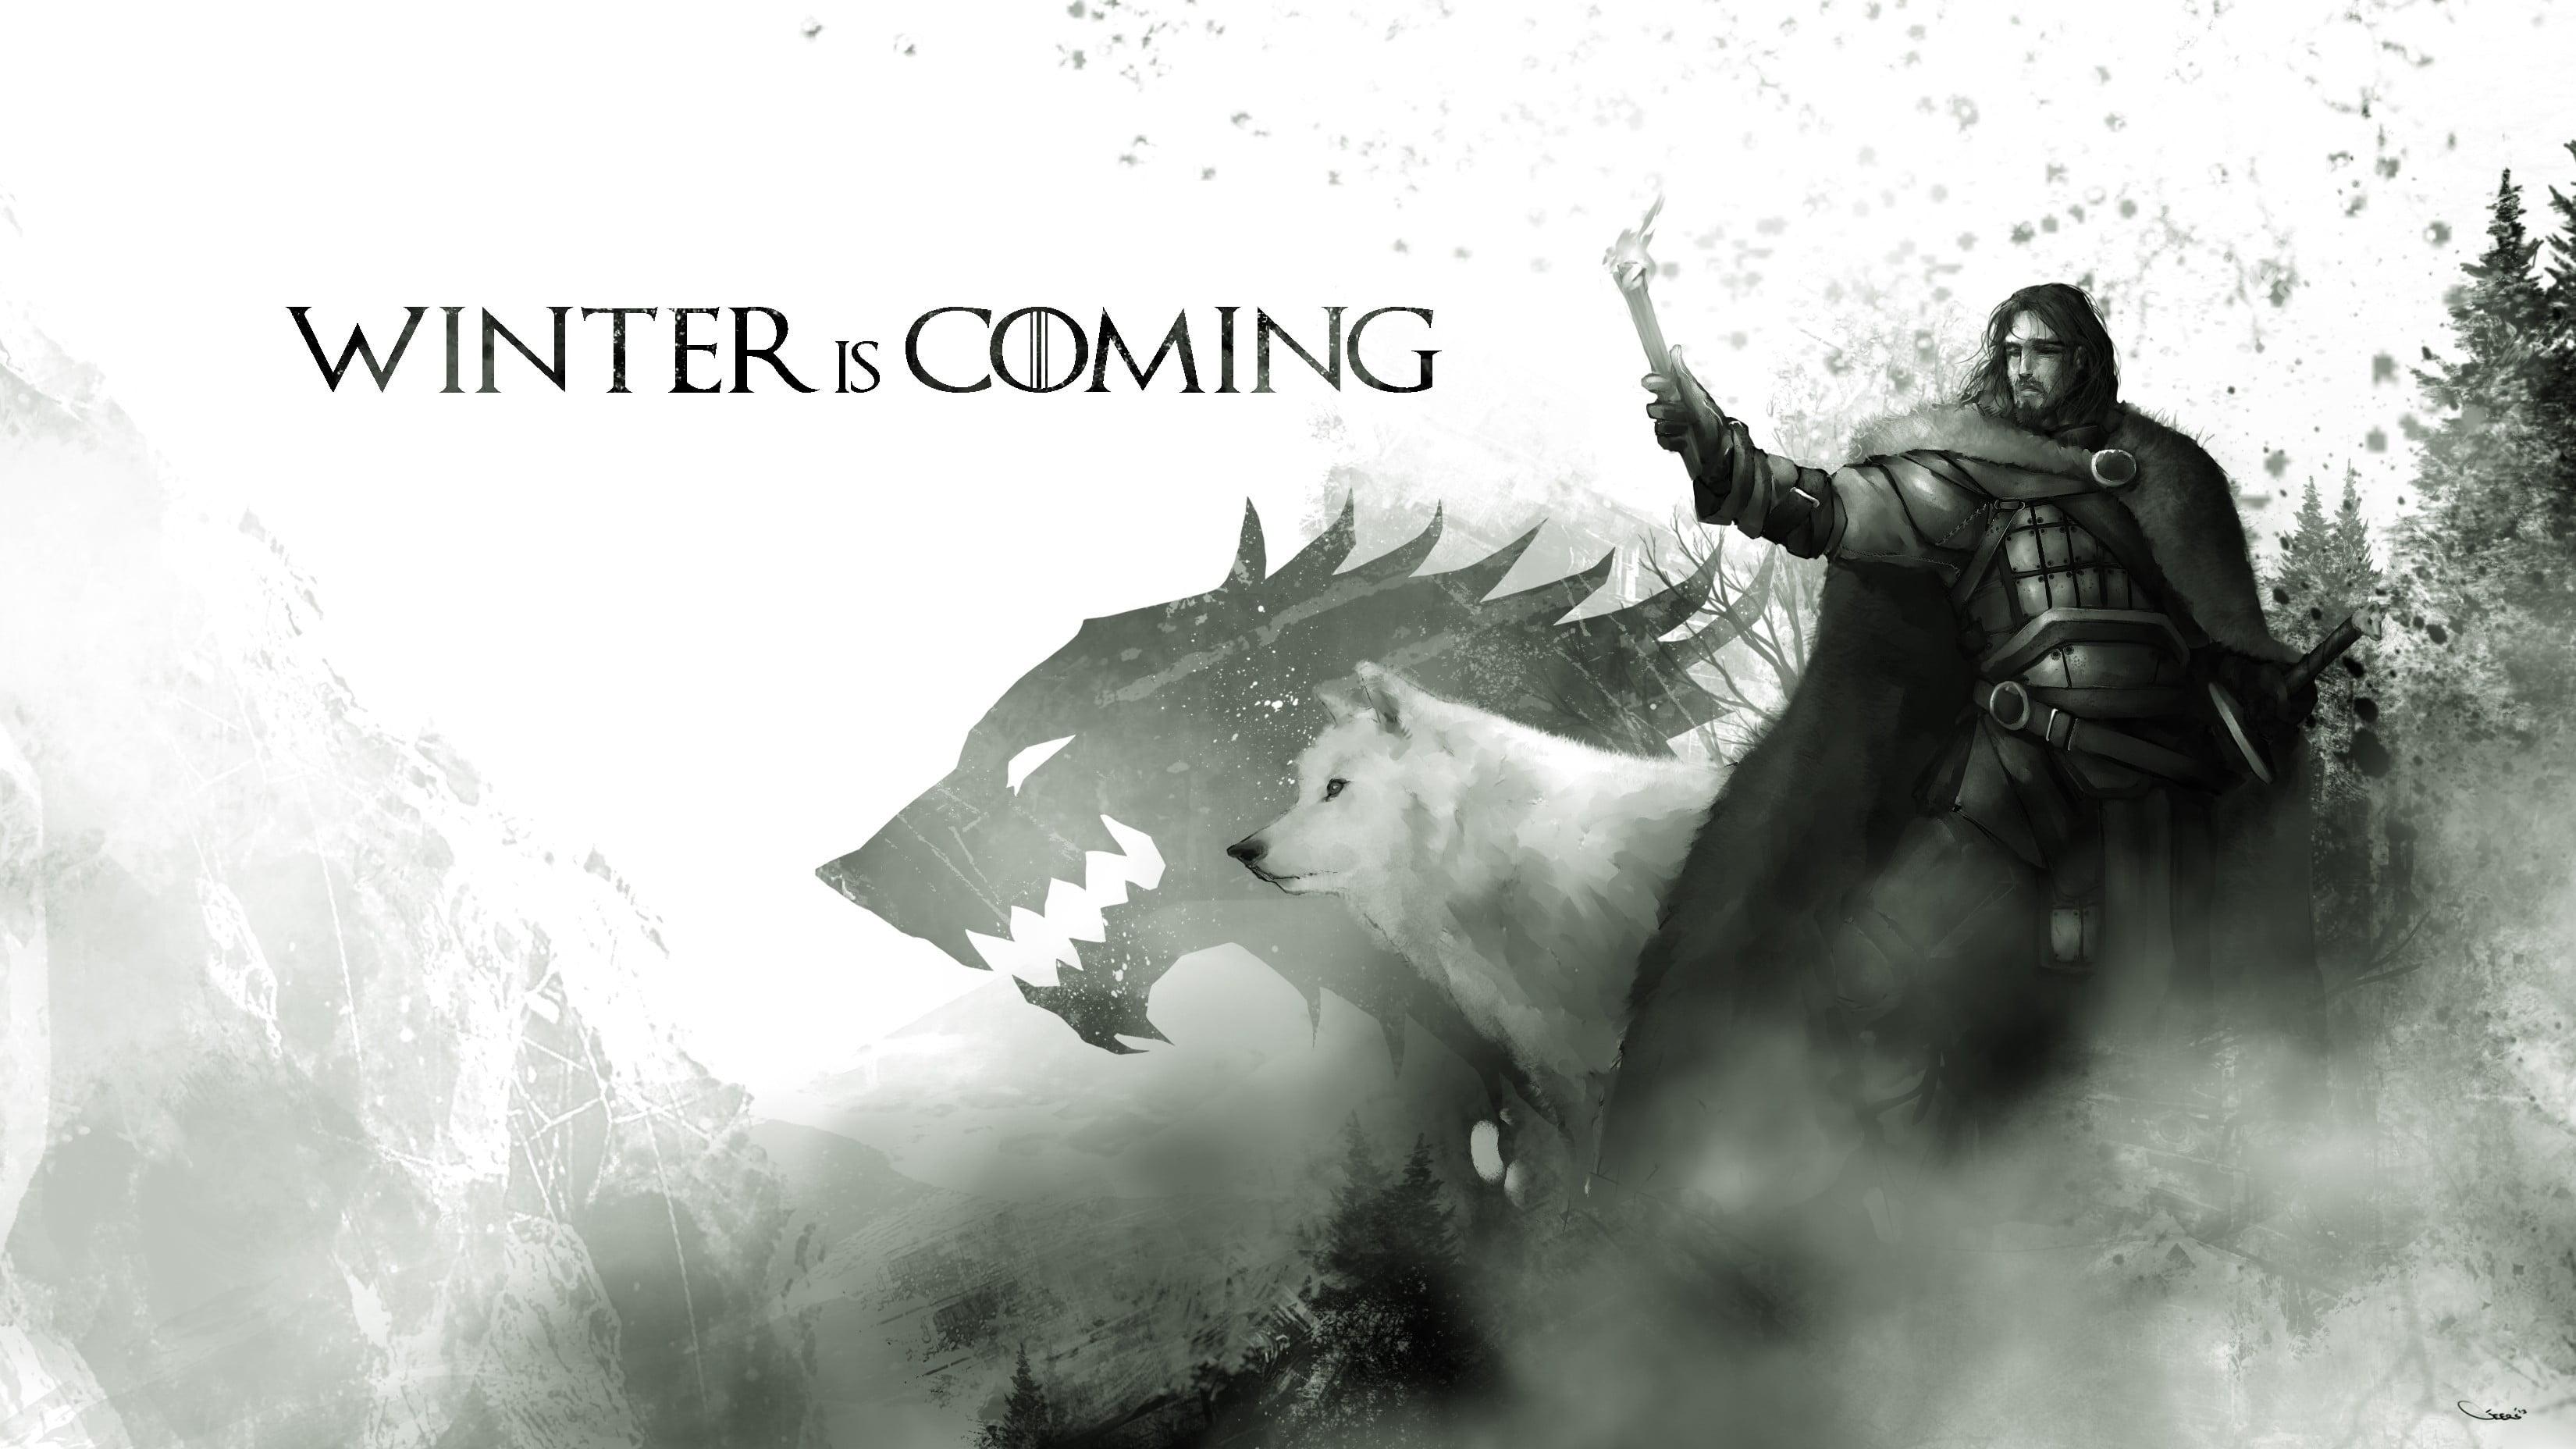 Game of Thrones Winter is Coming poster, Game of Thrones